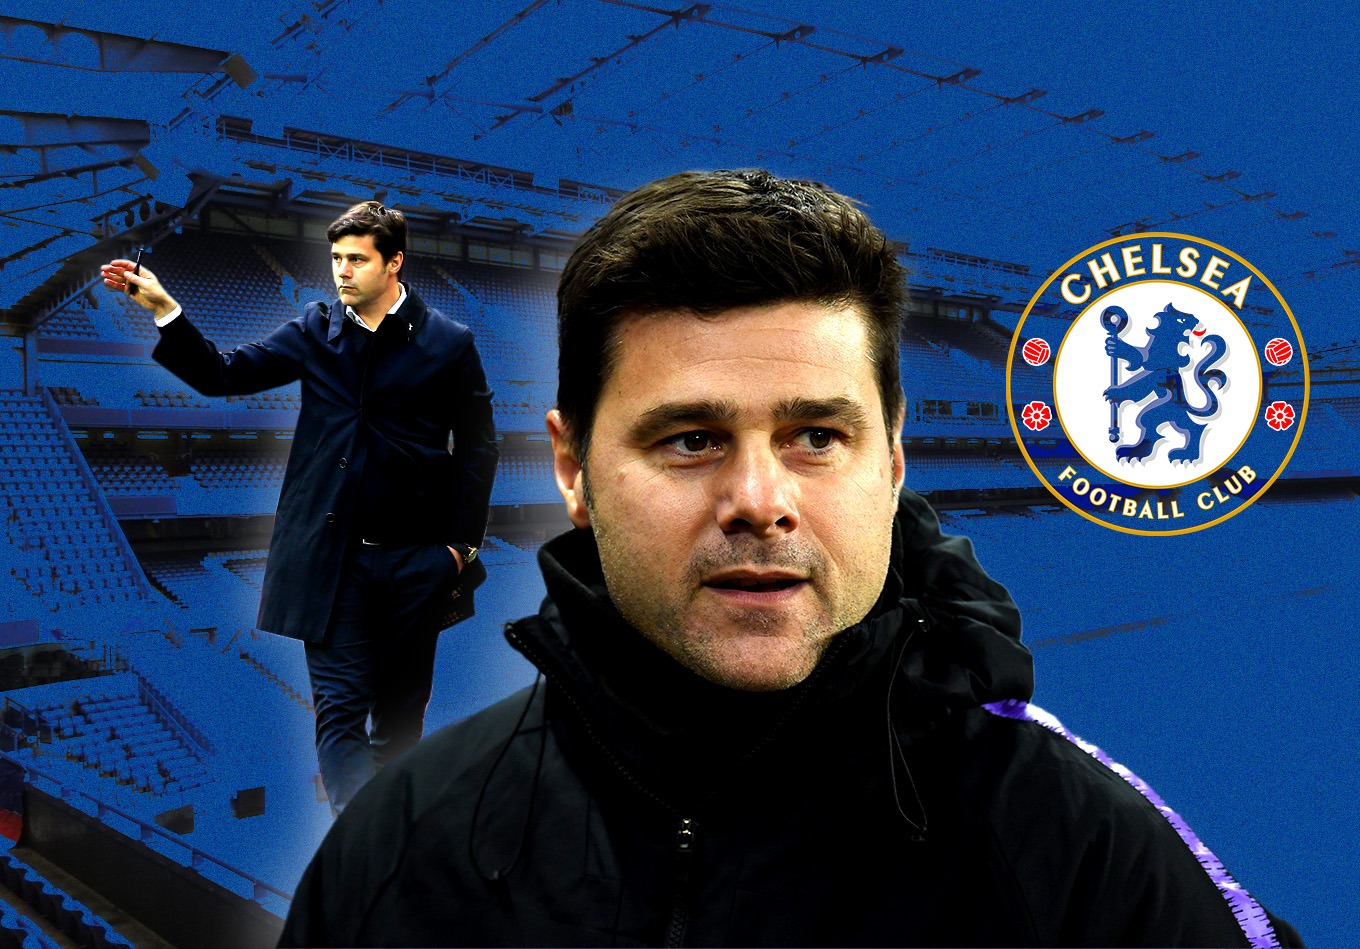 Pochettino to Chelsea – How Would It Work?